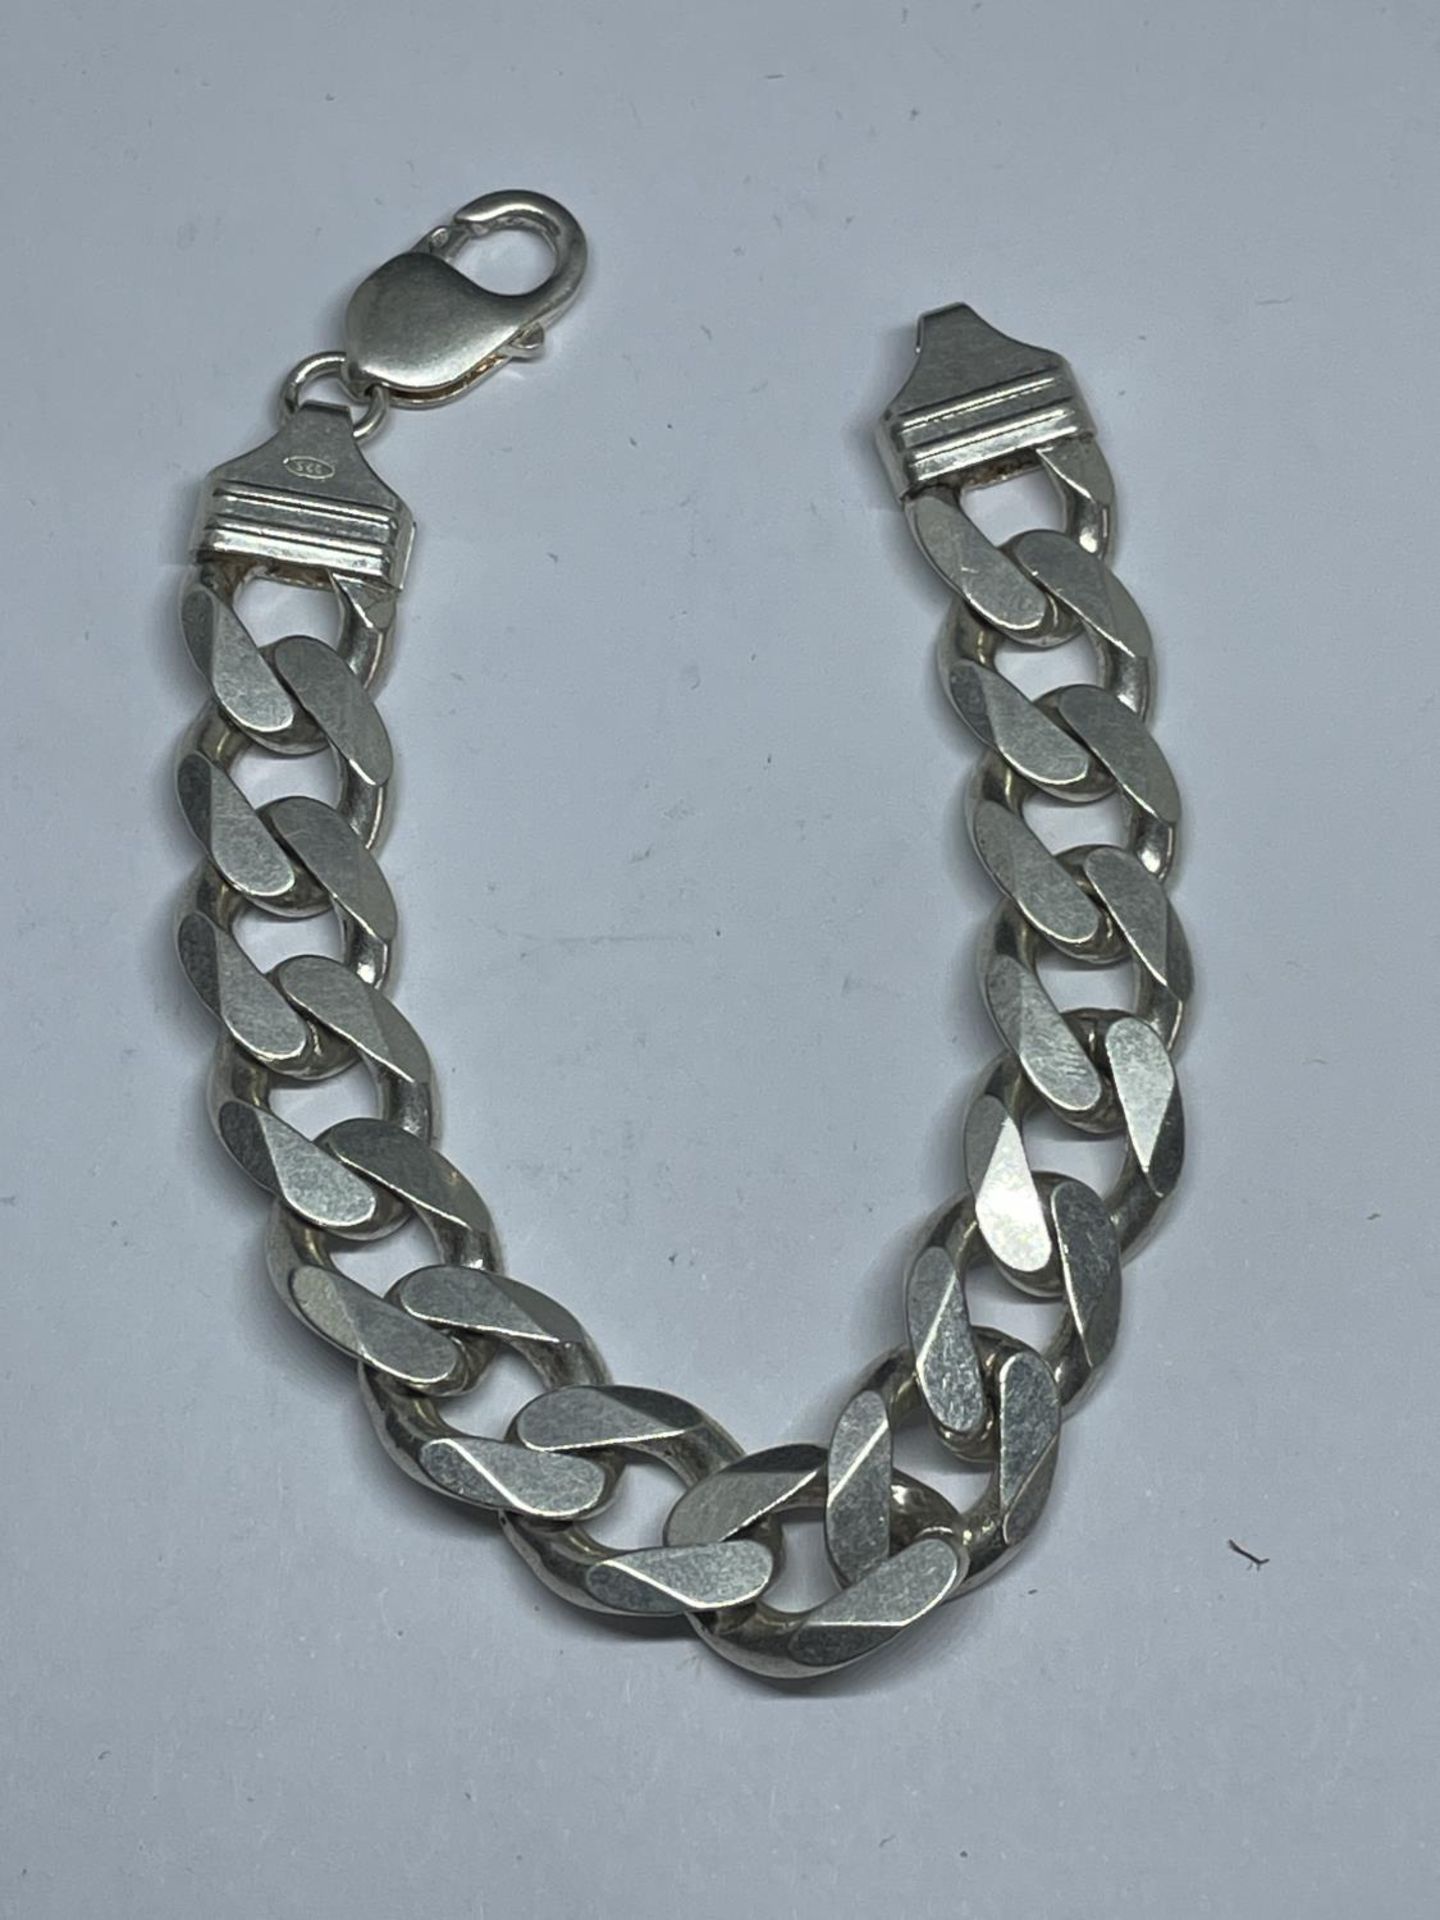 A HEAVY MARKED SILVER FLAT LINK BRACELET LENGTH 19 CM WEIGHT 45.4 GRAMS